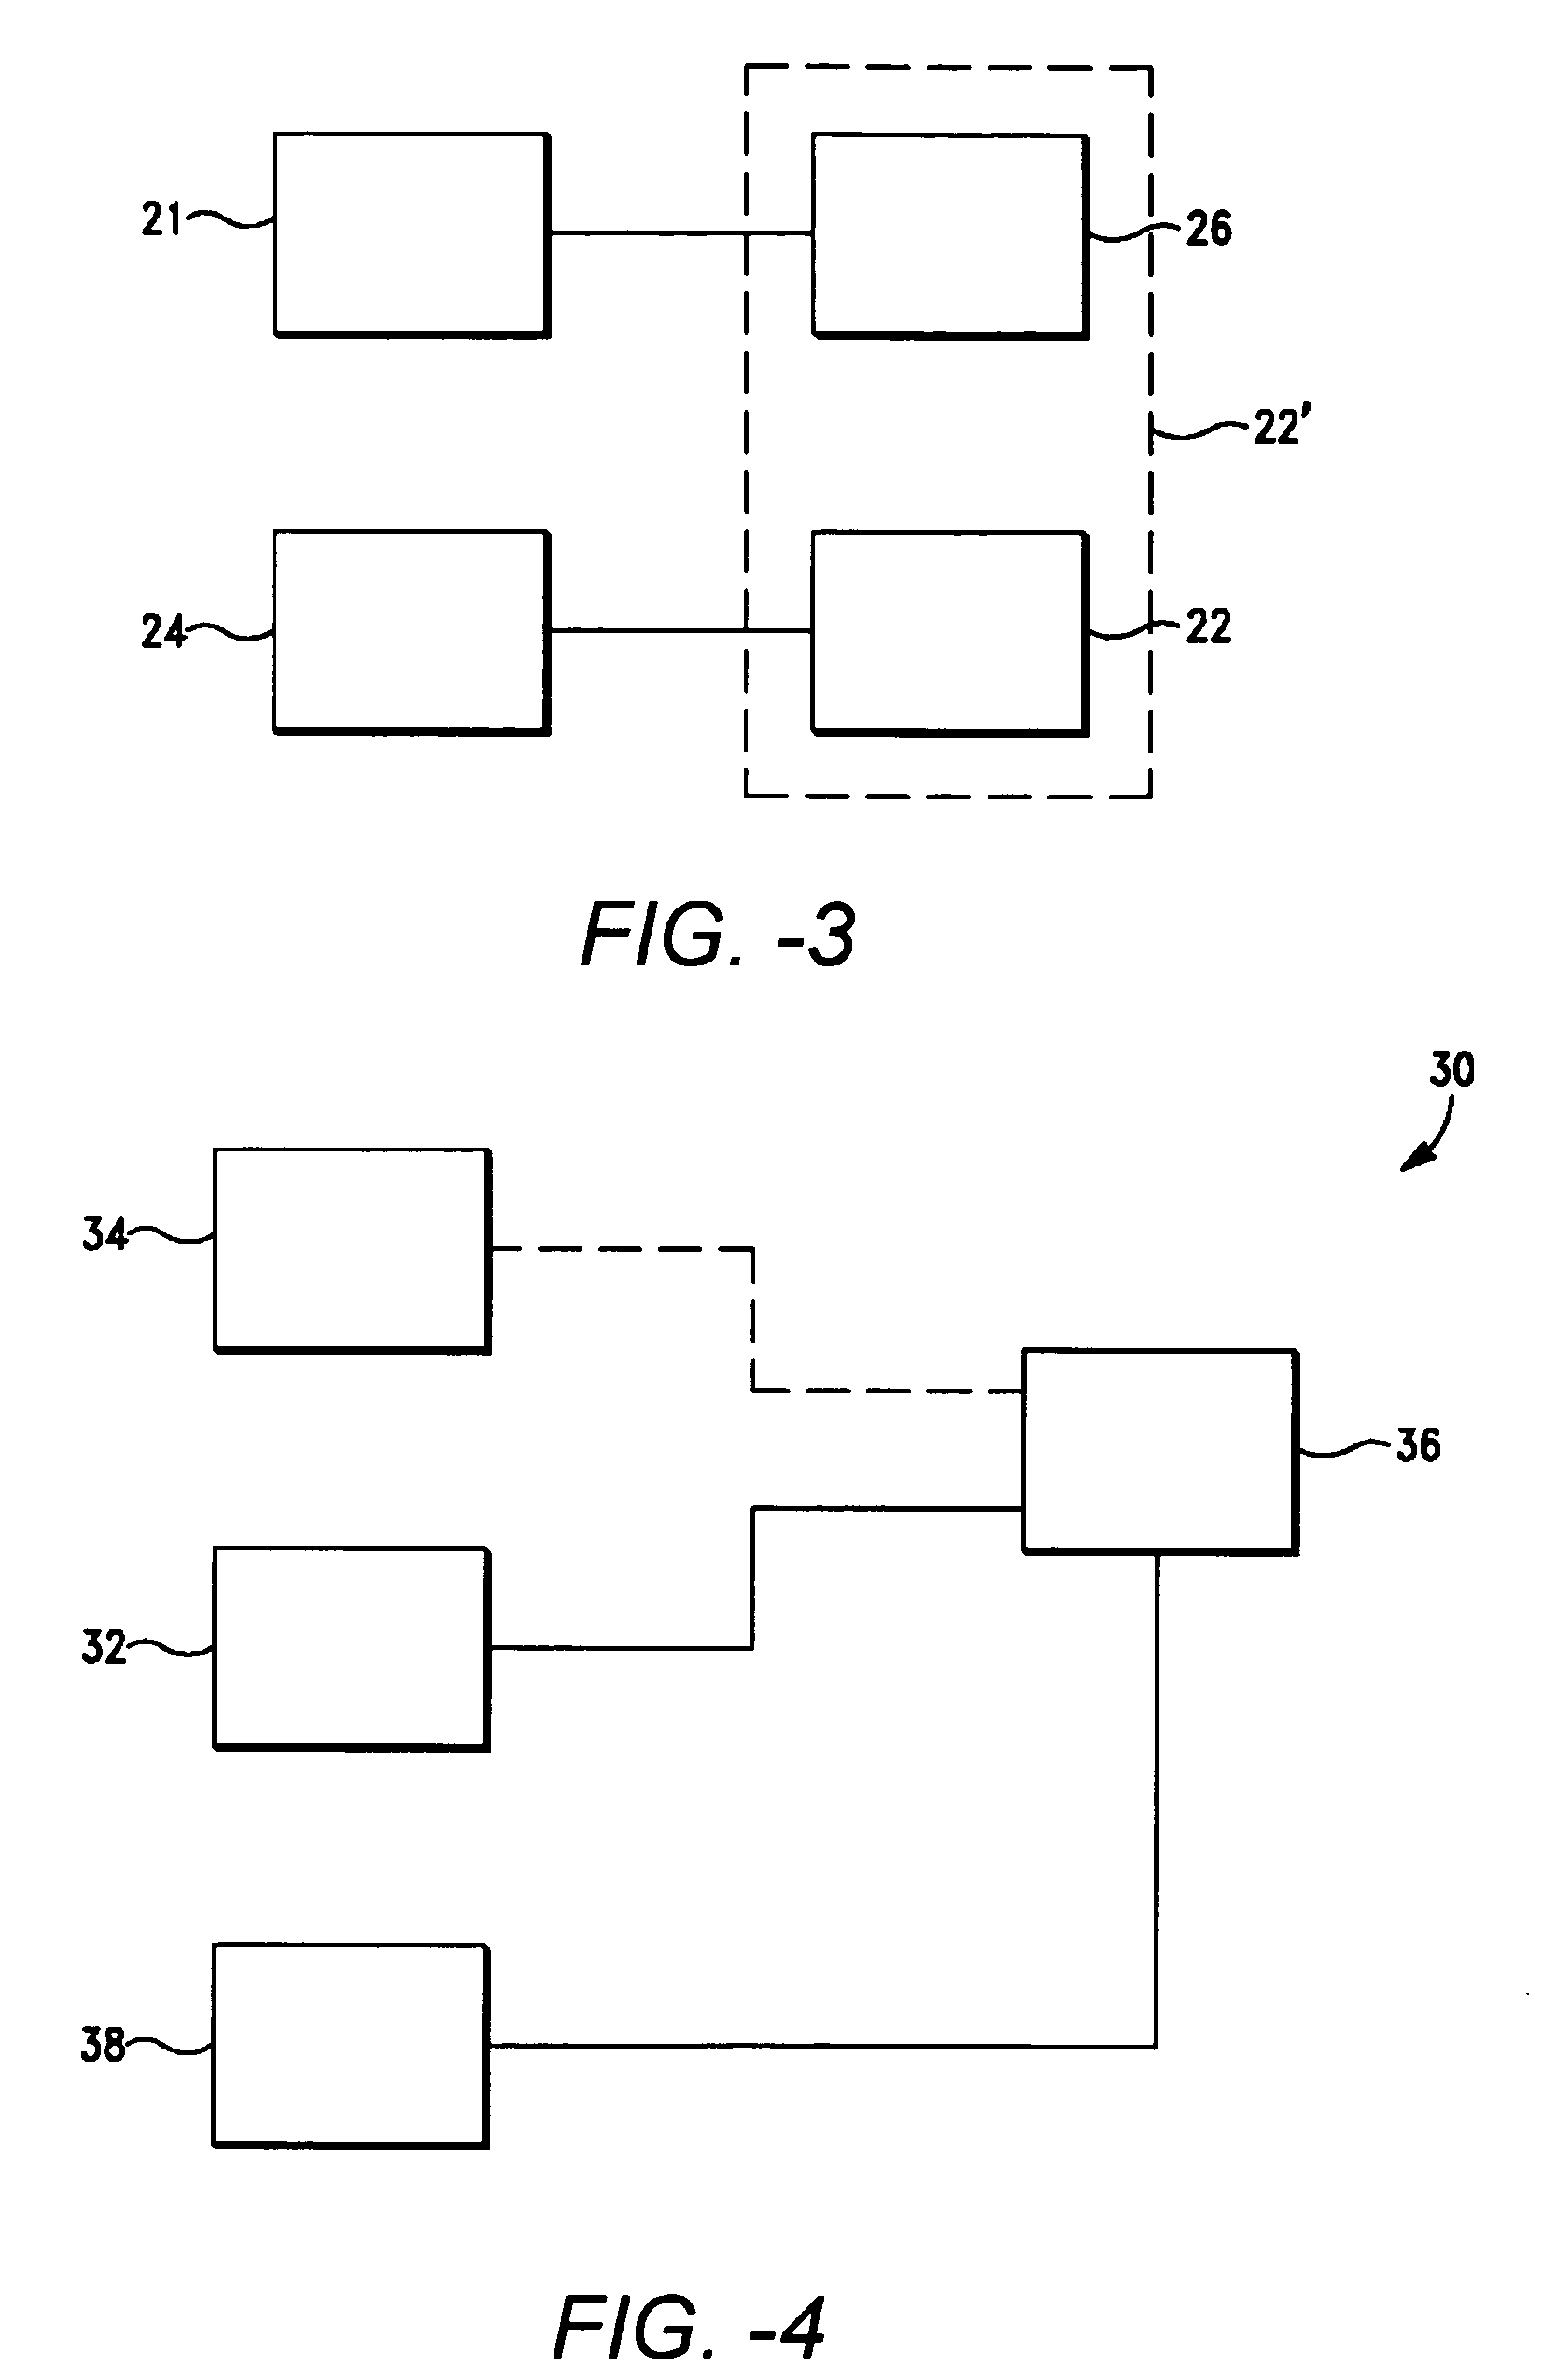 Method and system to control gastrointestinal function by means of neuro-electrical coded signals